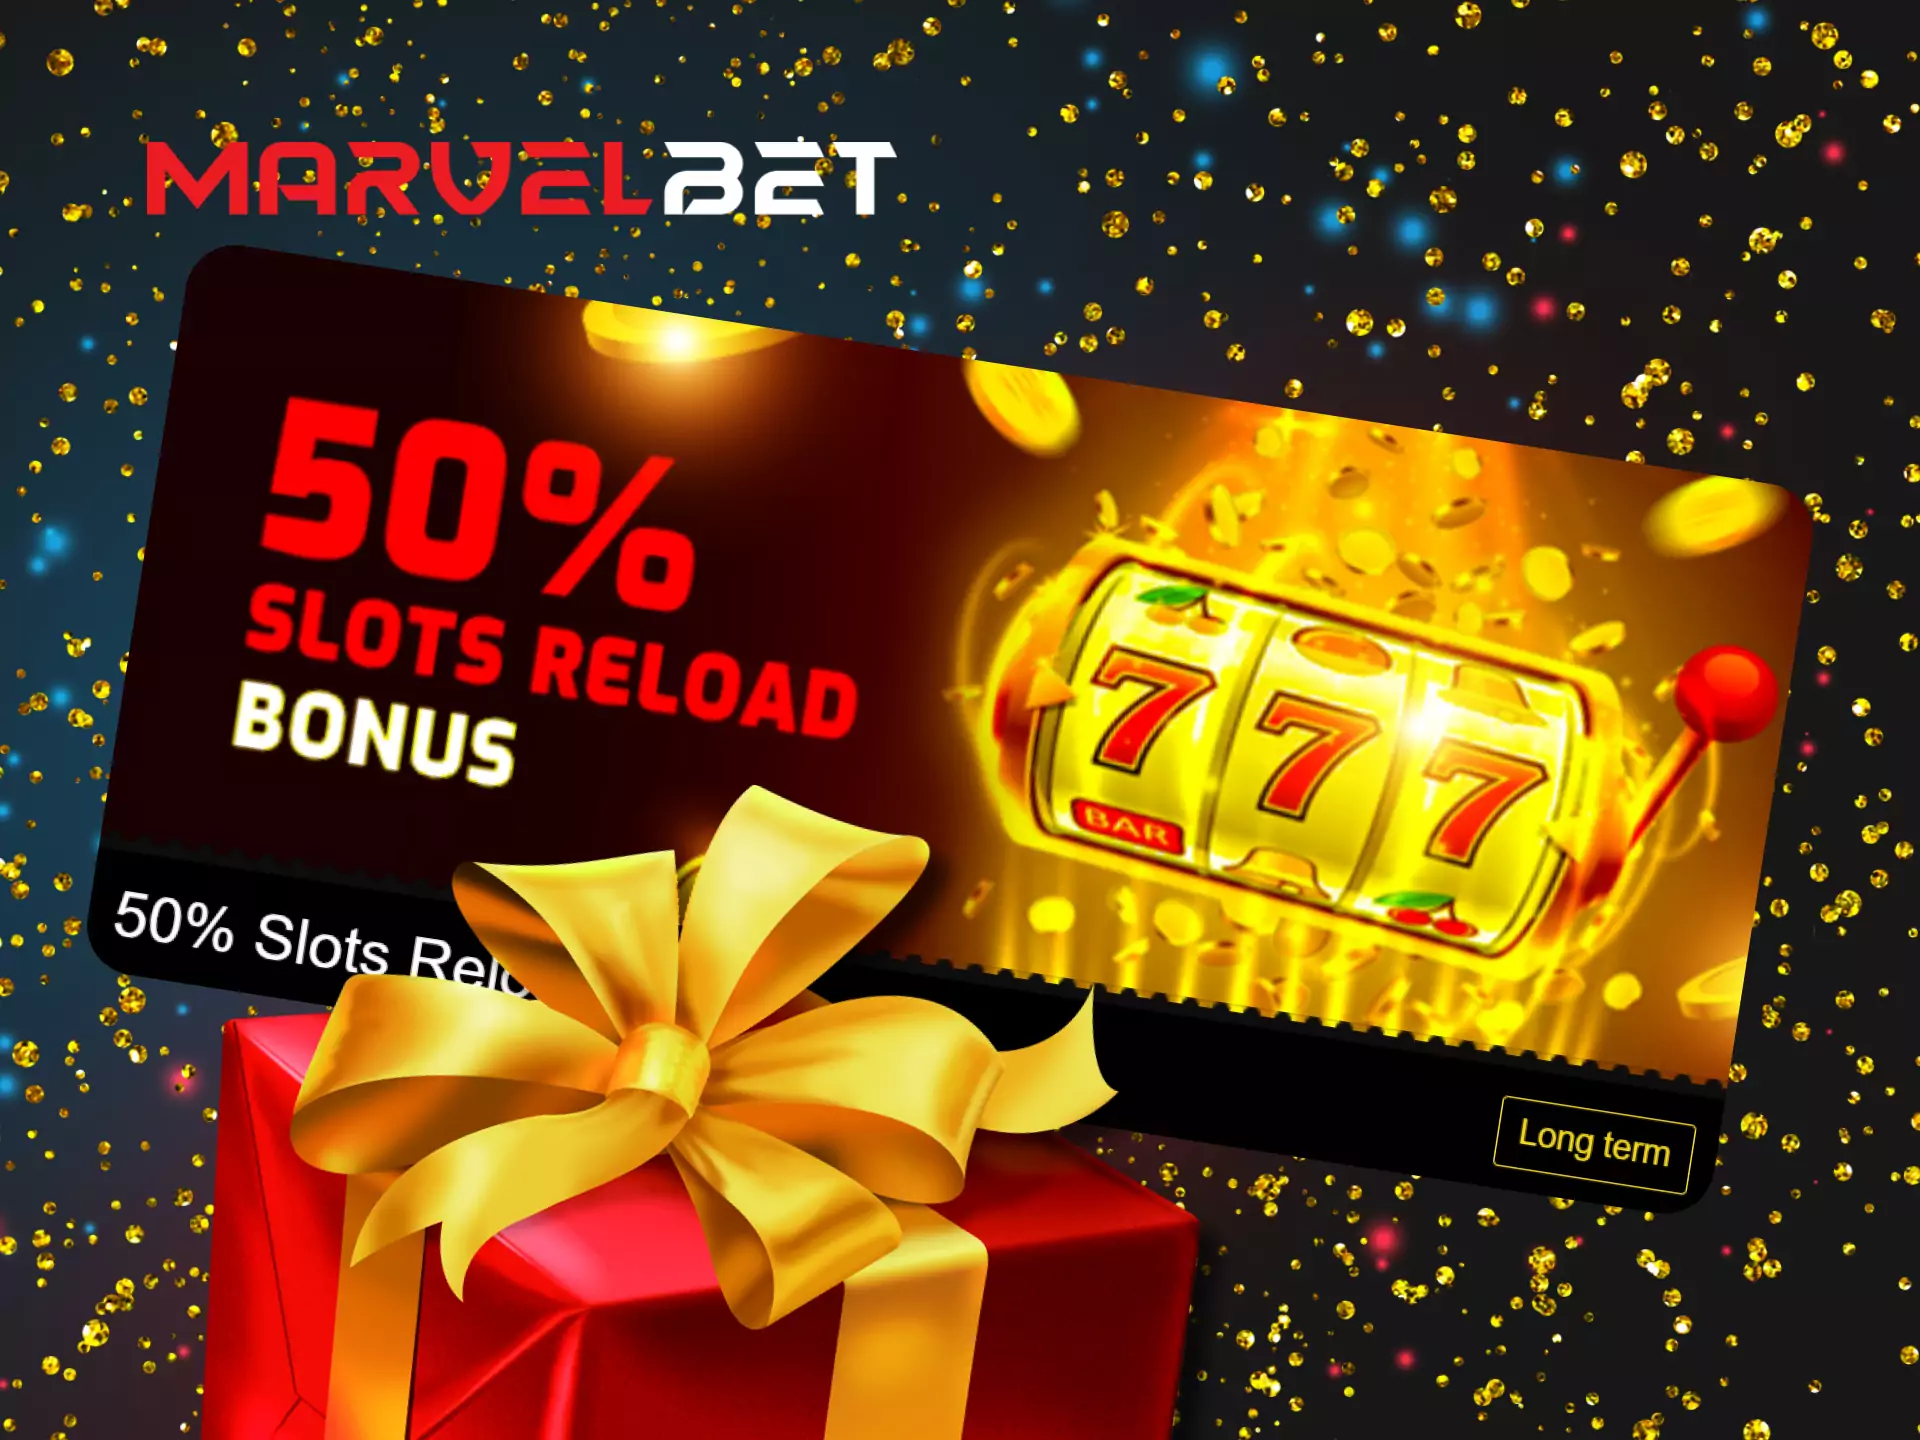 Get a special bonus to play slots with MarvelBet.